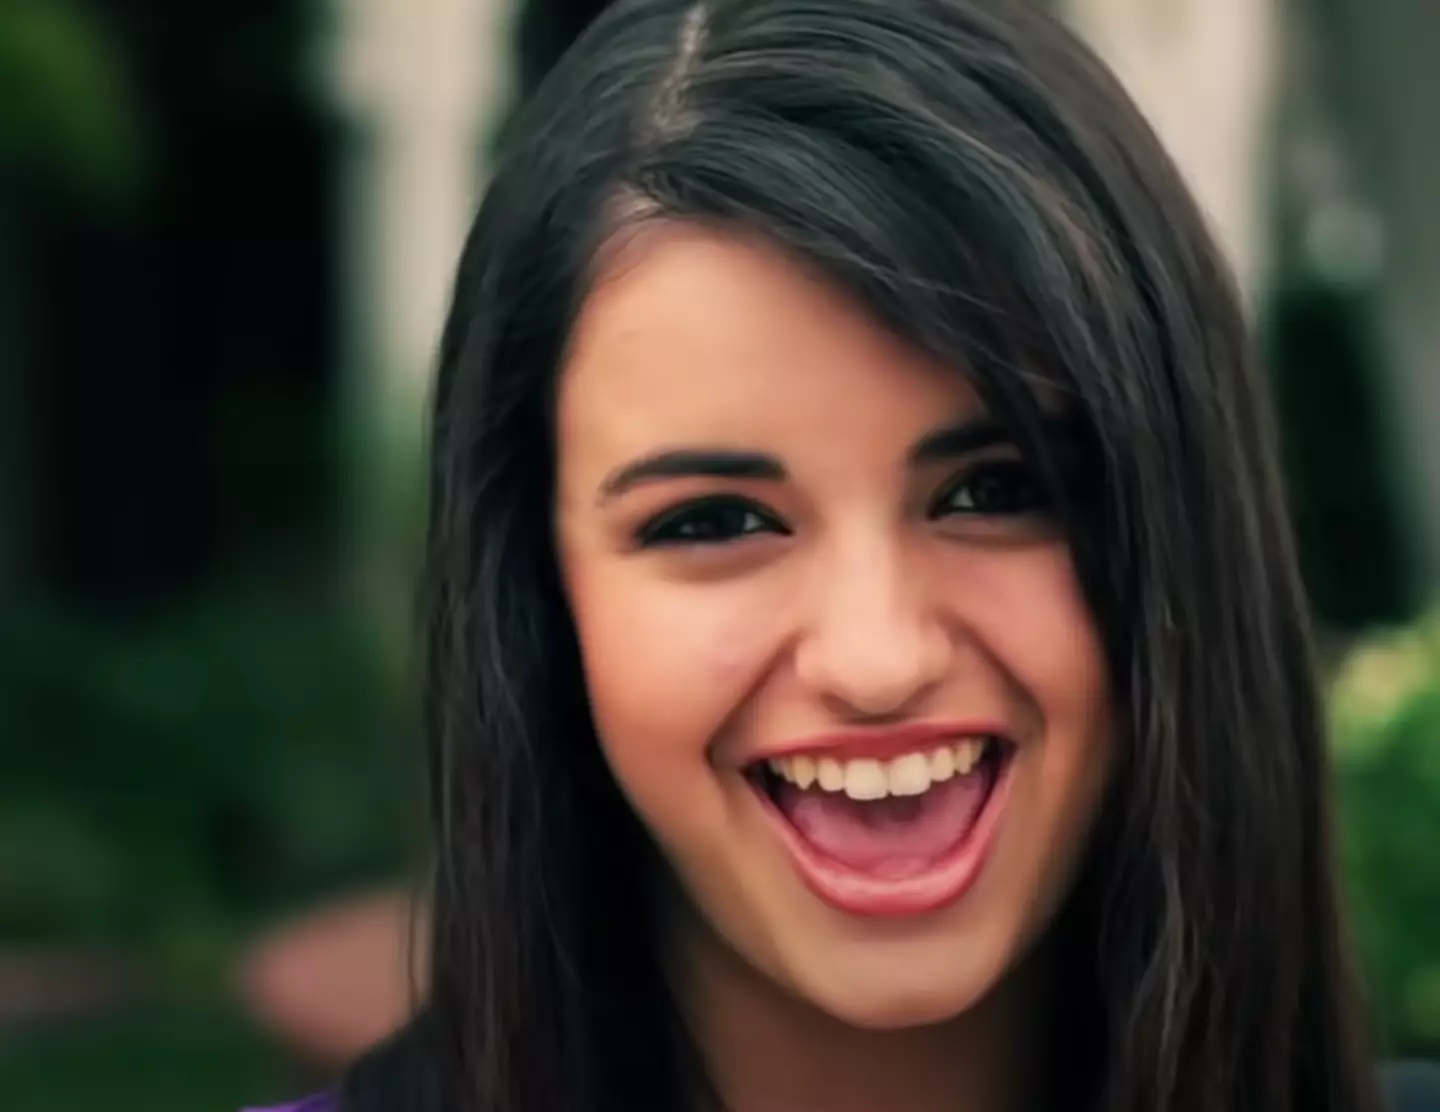 Rebecca Black was only 13 when Friday was released.